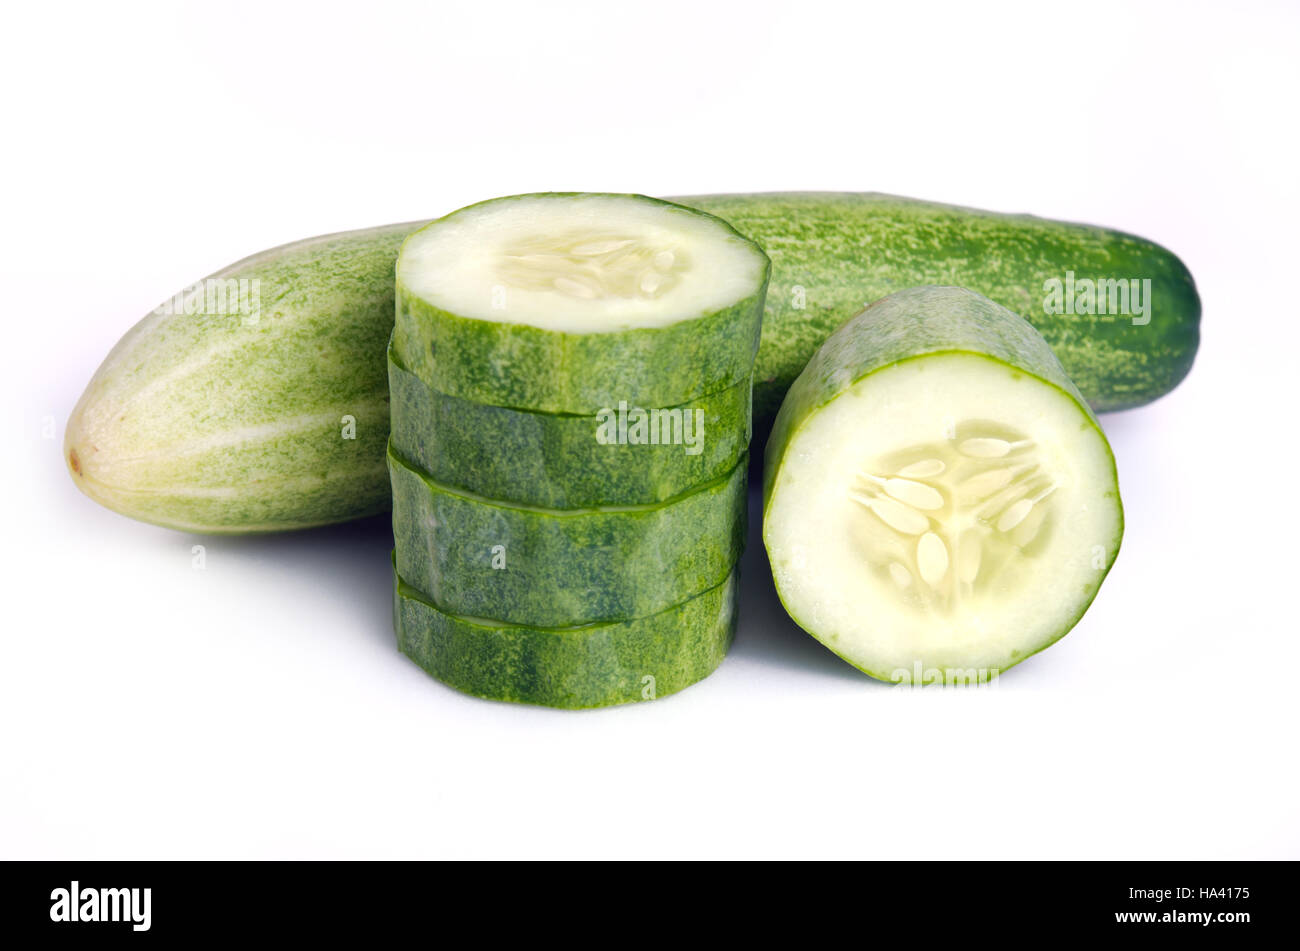 Fresh cucumber (also named as Cucumis sativus, cucurbitaceae, Cucumis cucumber, or wild cucumber) isolated on white background Stock Photo